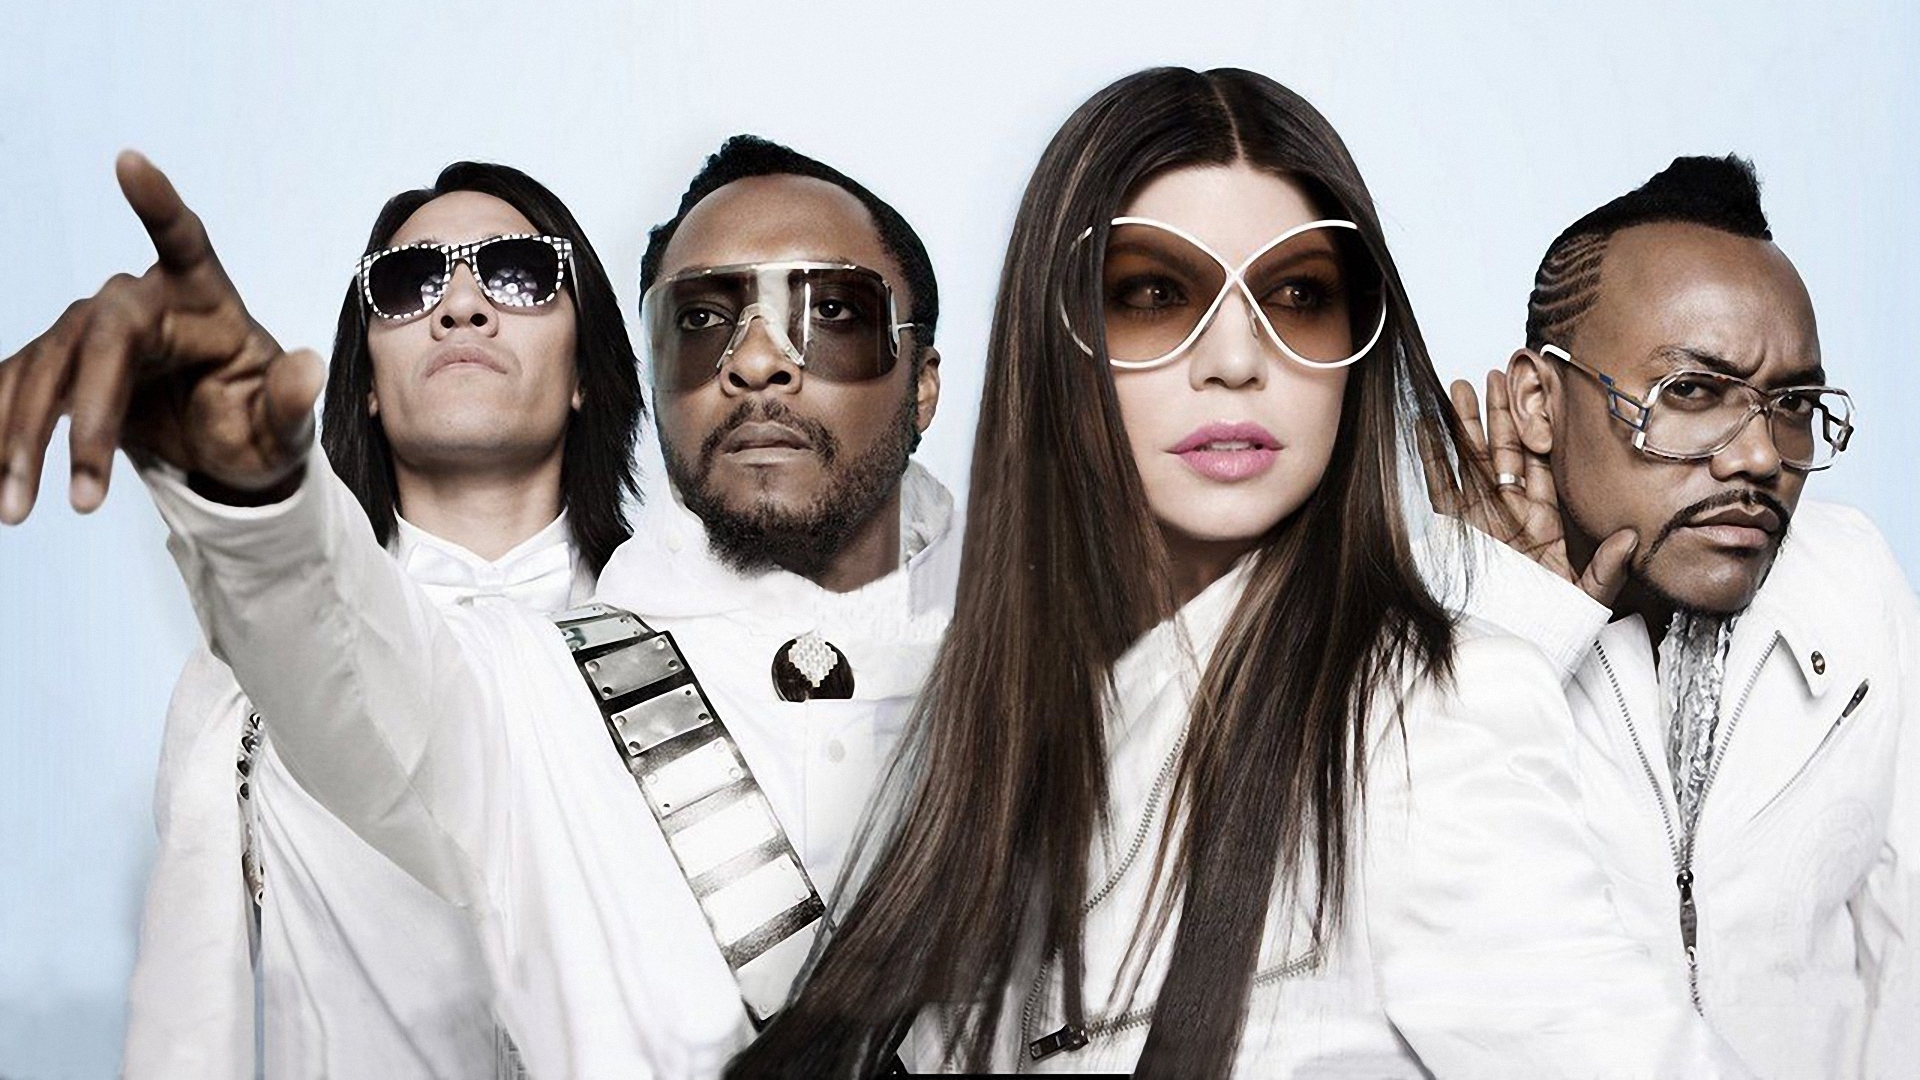 High Resolution Wallpaper | The Black Eyed Peas 1920x1080 px